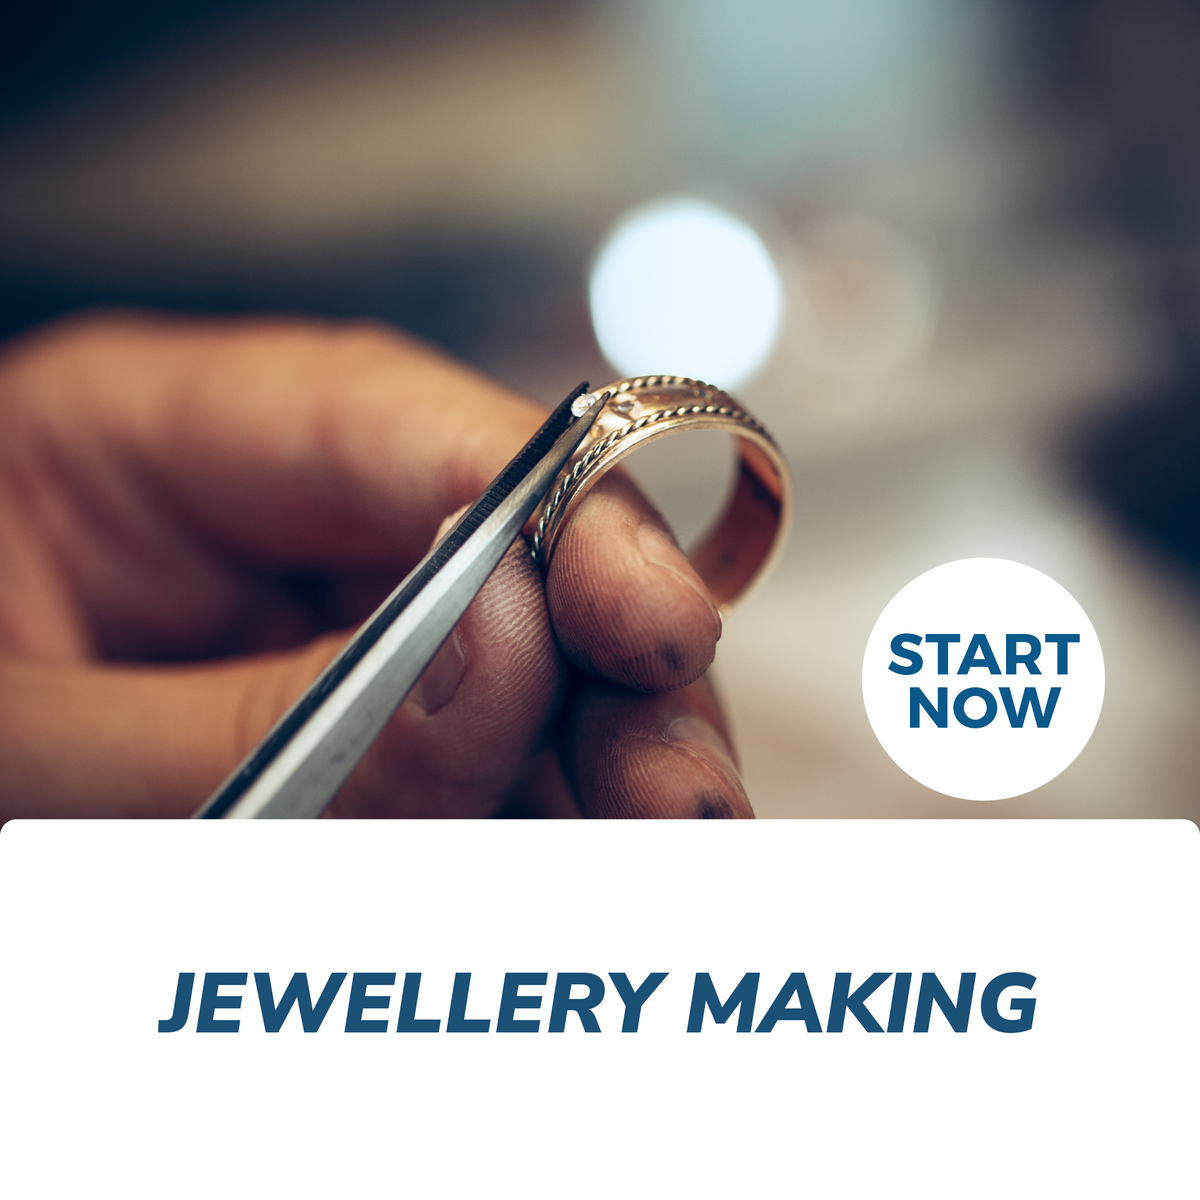 PART 1: THE JEWELRY DESIGNER'S ORIENTATION TO OTHER JEWELRY